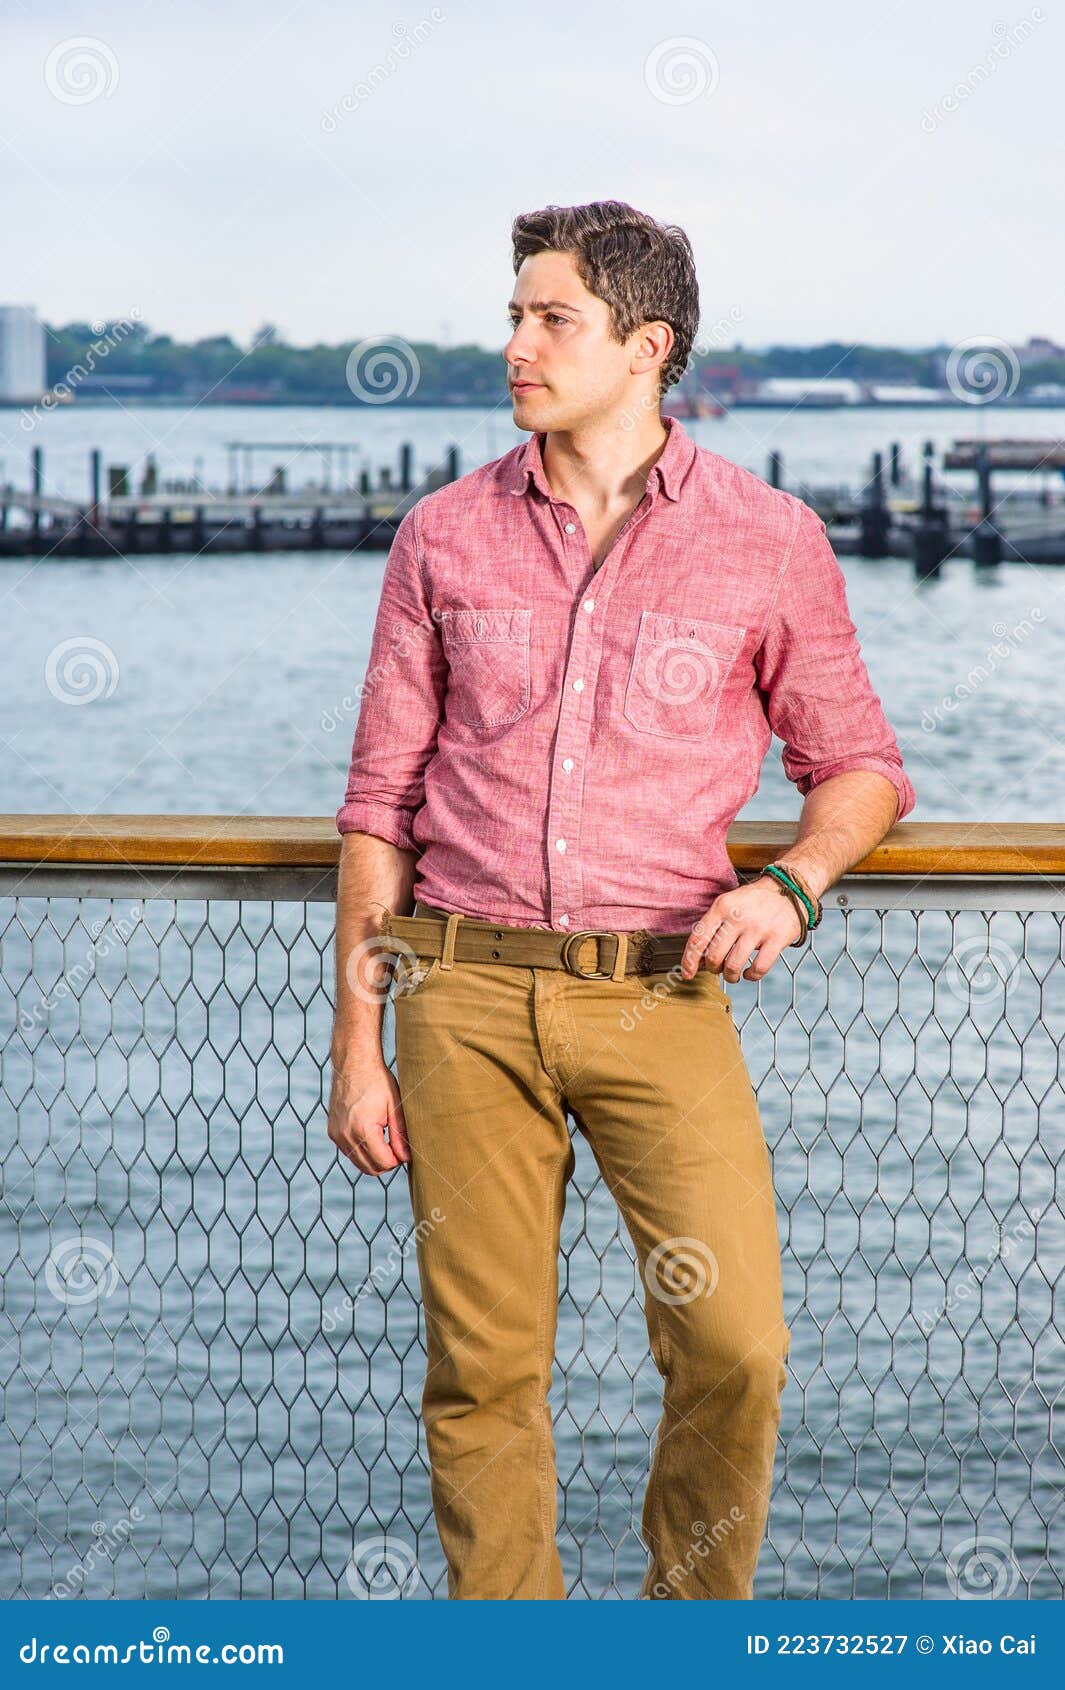 Relaxed Casual Man In Jeans And Red Tshirt Walking And Looking At